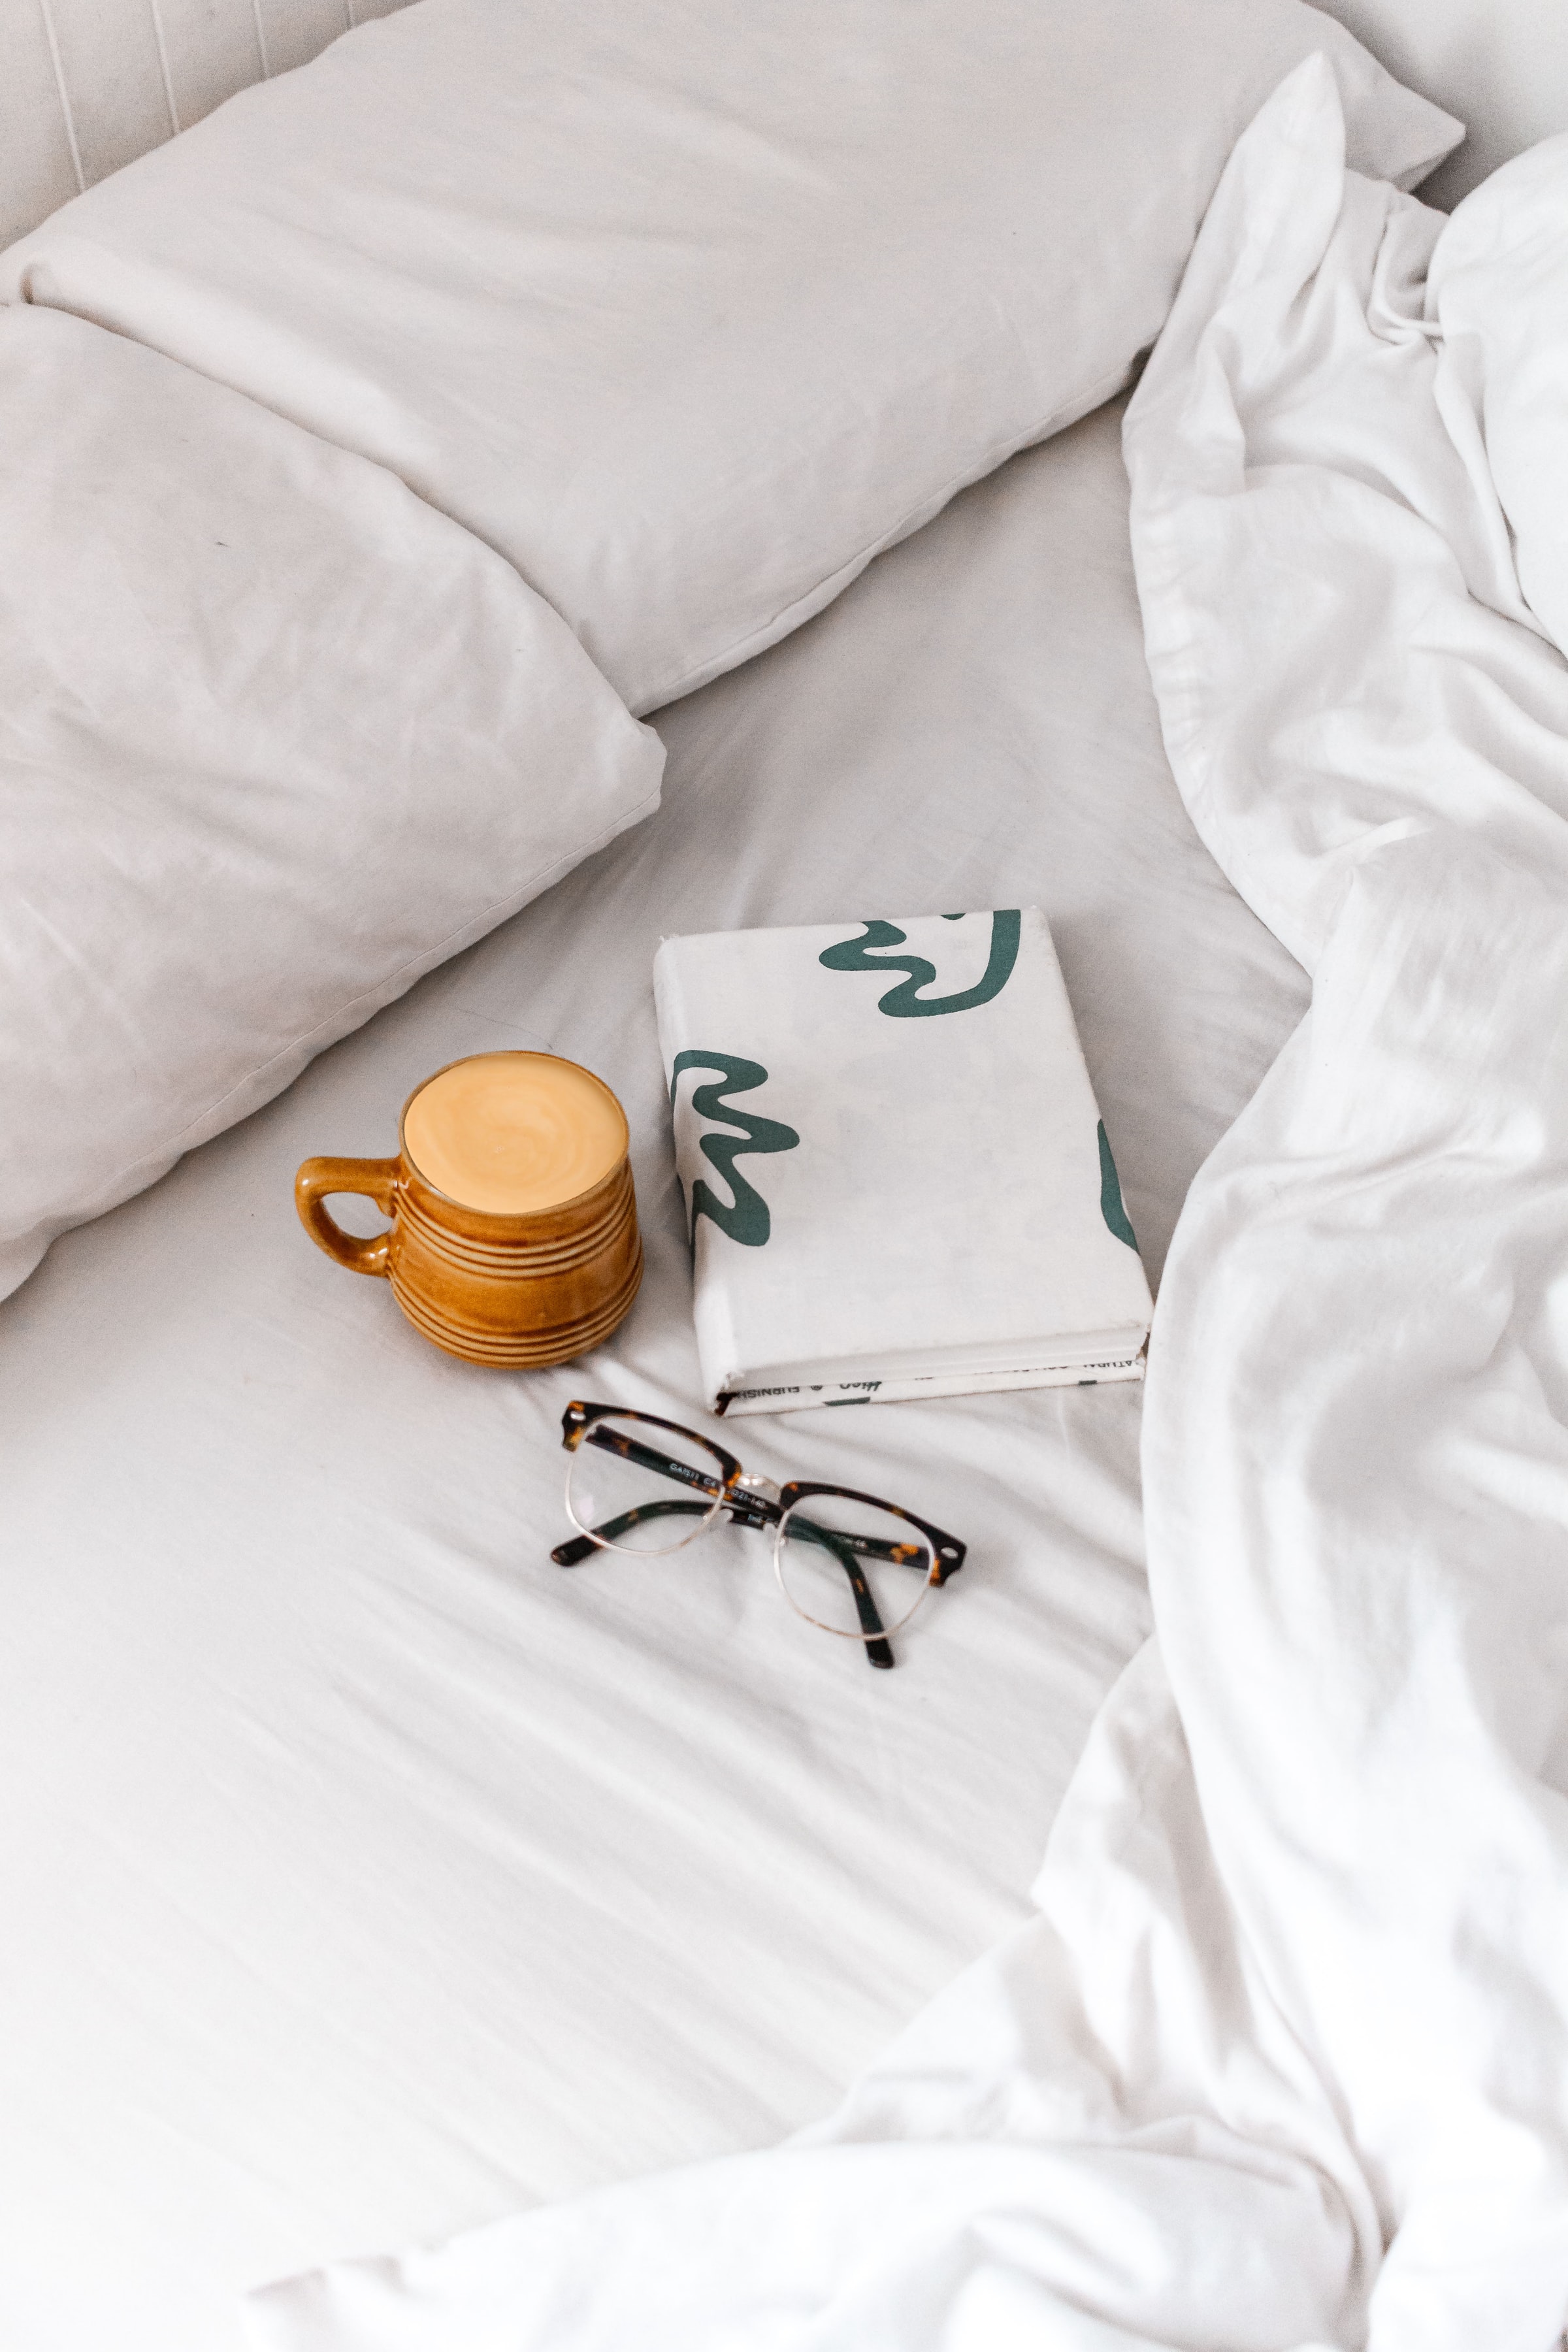 bed, coffee, miscellanea, miscellaneous, cup, book, glasses, spectacles Aesthetic wallpaper